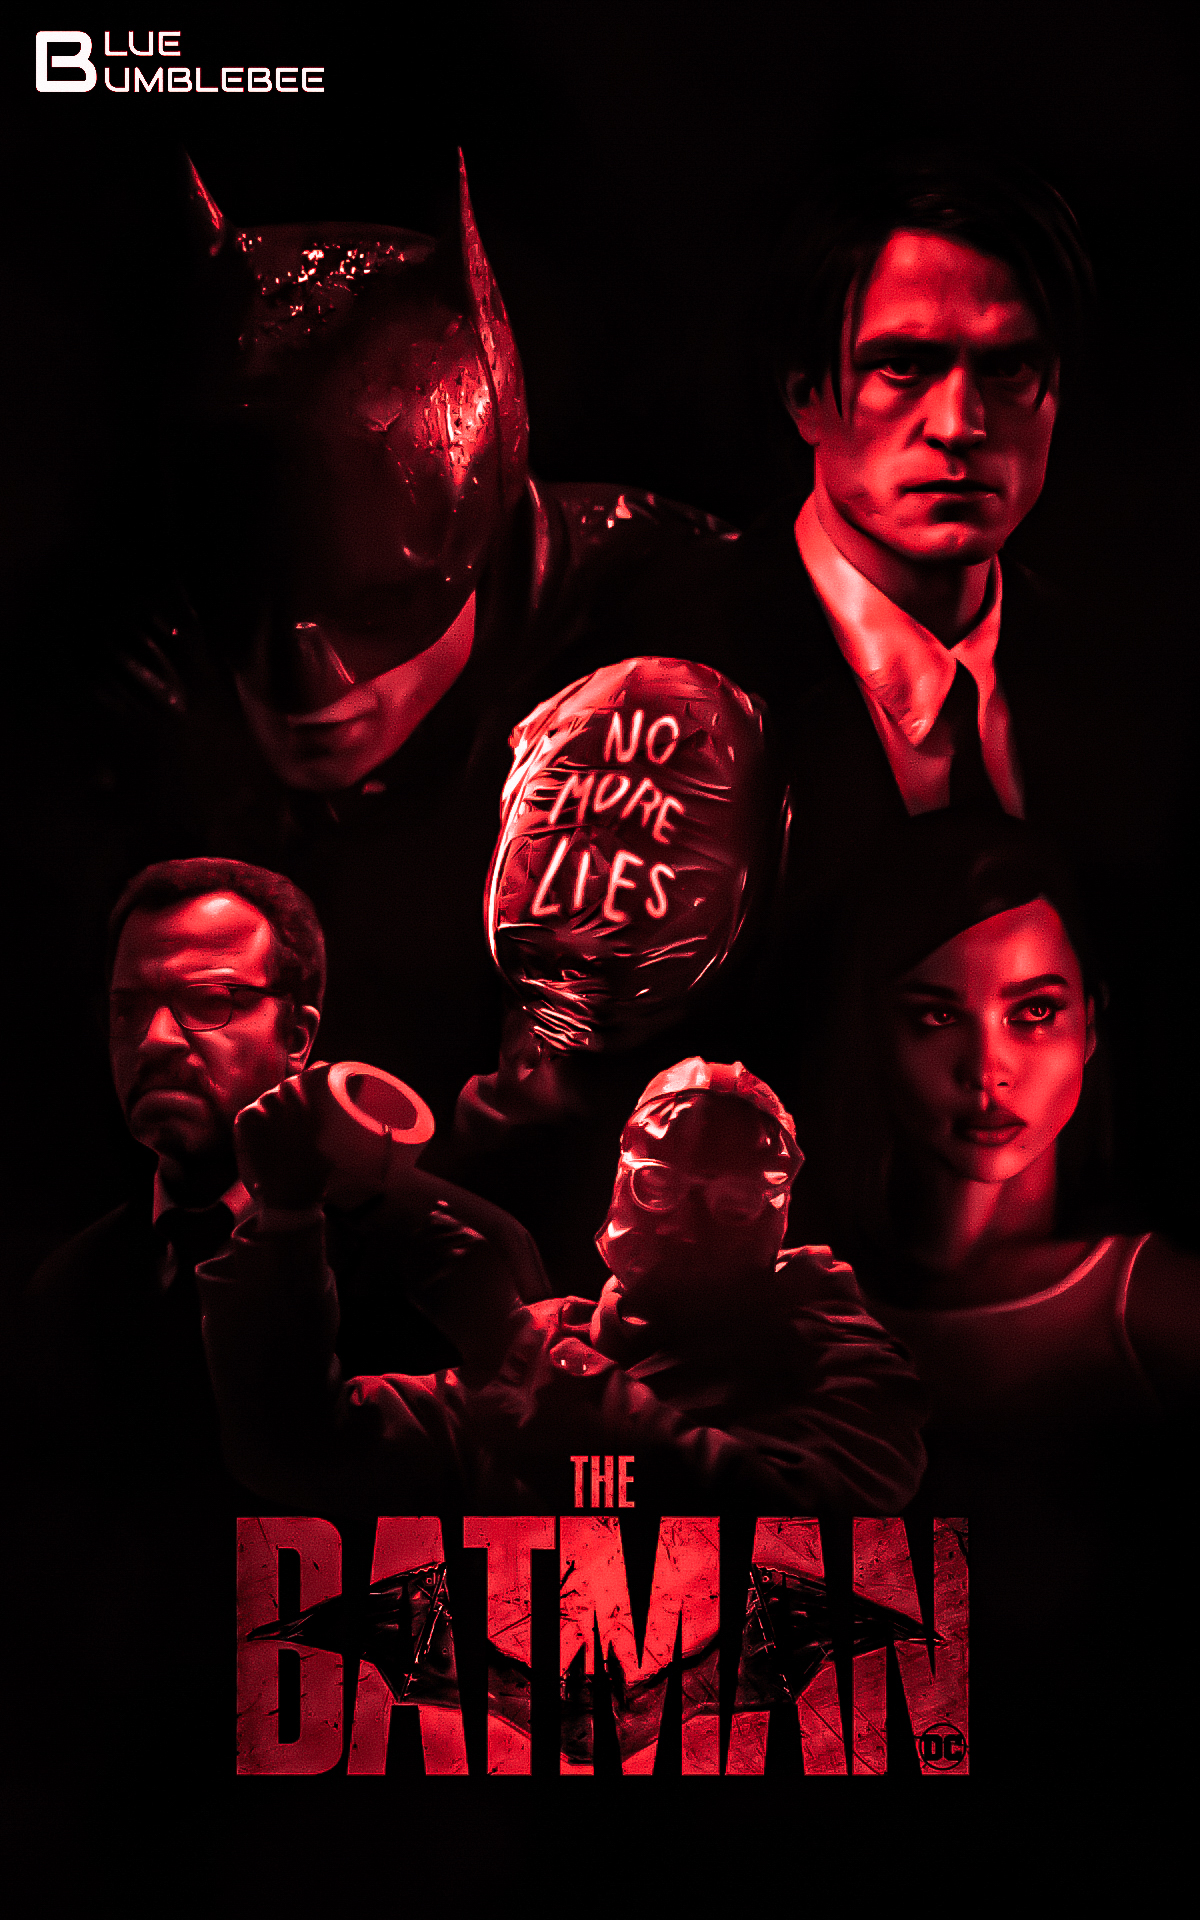 The Batman Poster (Red Version) by BlueBumblebee04 on DeviantArt